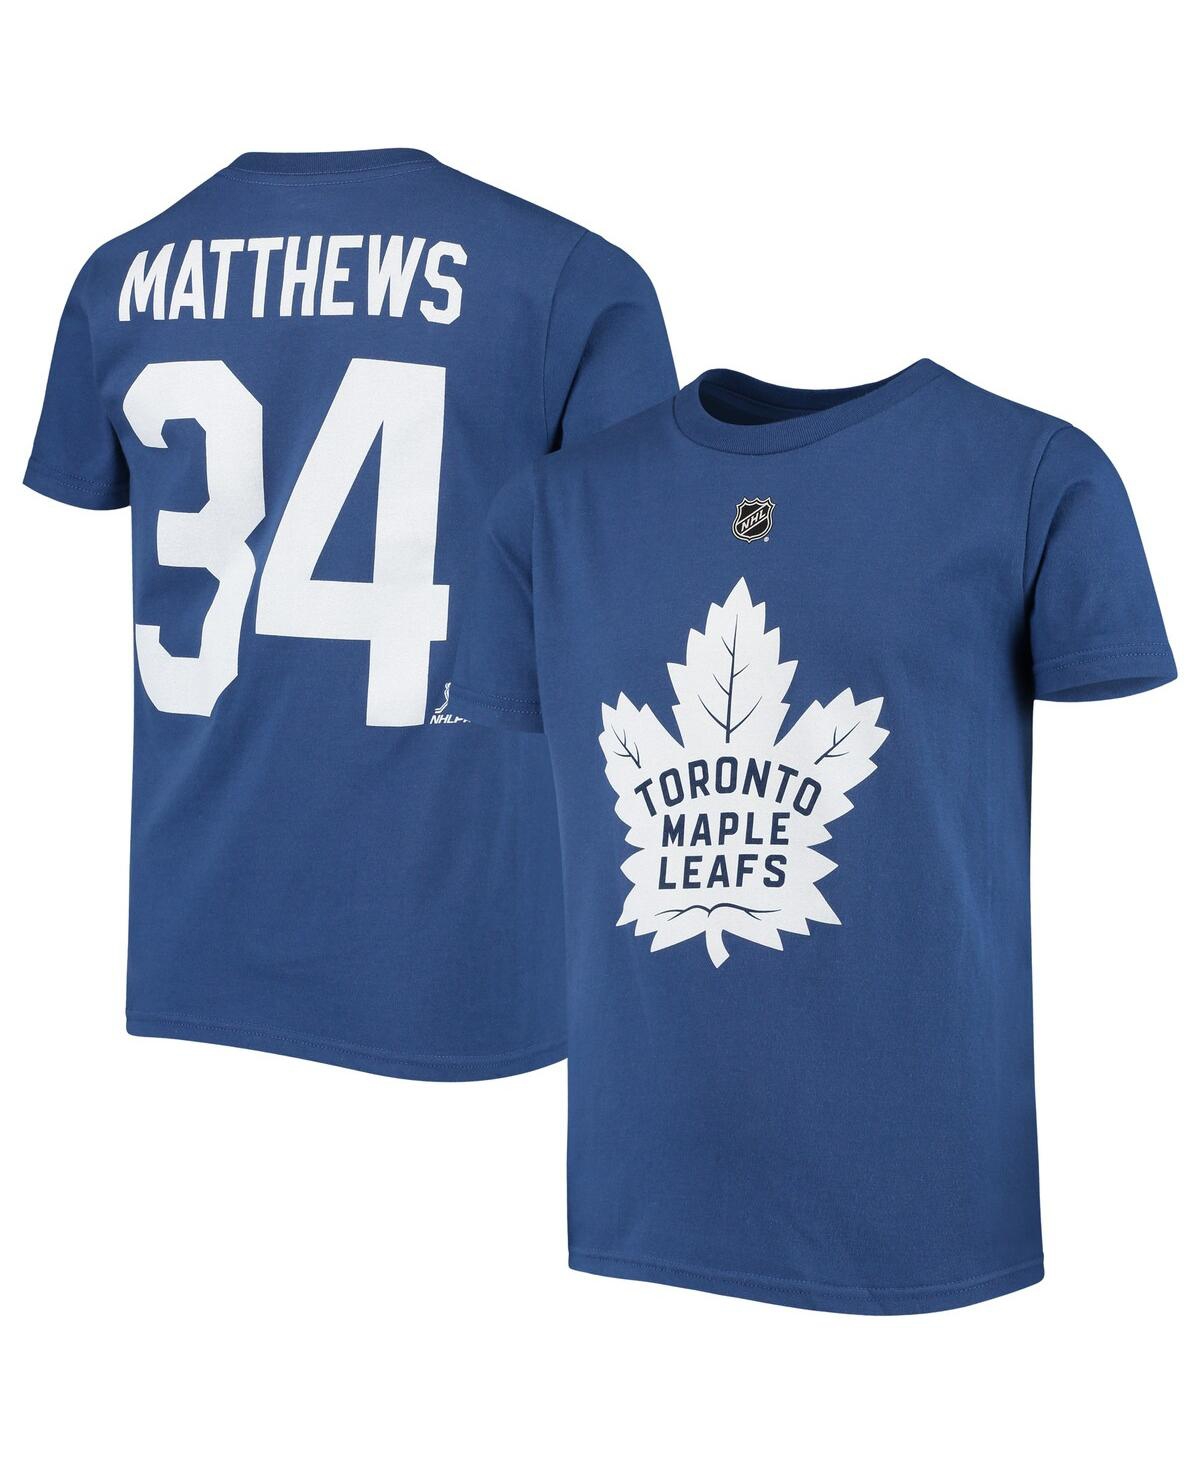 Outerstuff Kids' Big Boys Auston Matthews Blue Toronto Maple Leafs Player Name And Number T-shirt